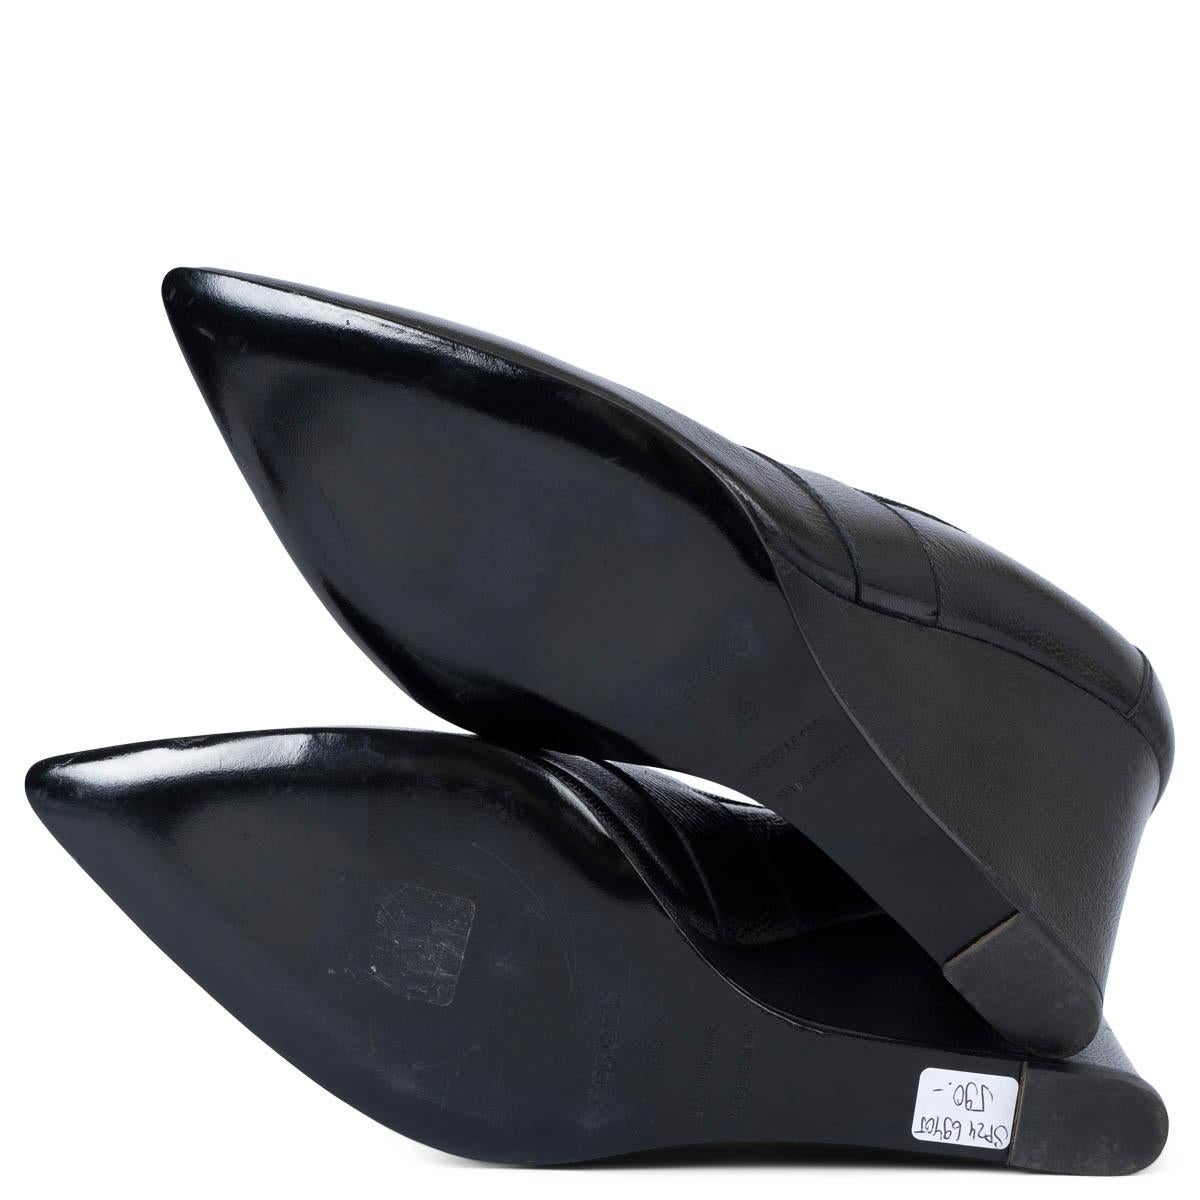 HERMES black leather POINTED TOE WEDGE Pumps Shoes 39 For Sale 2